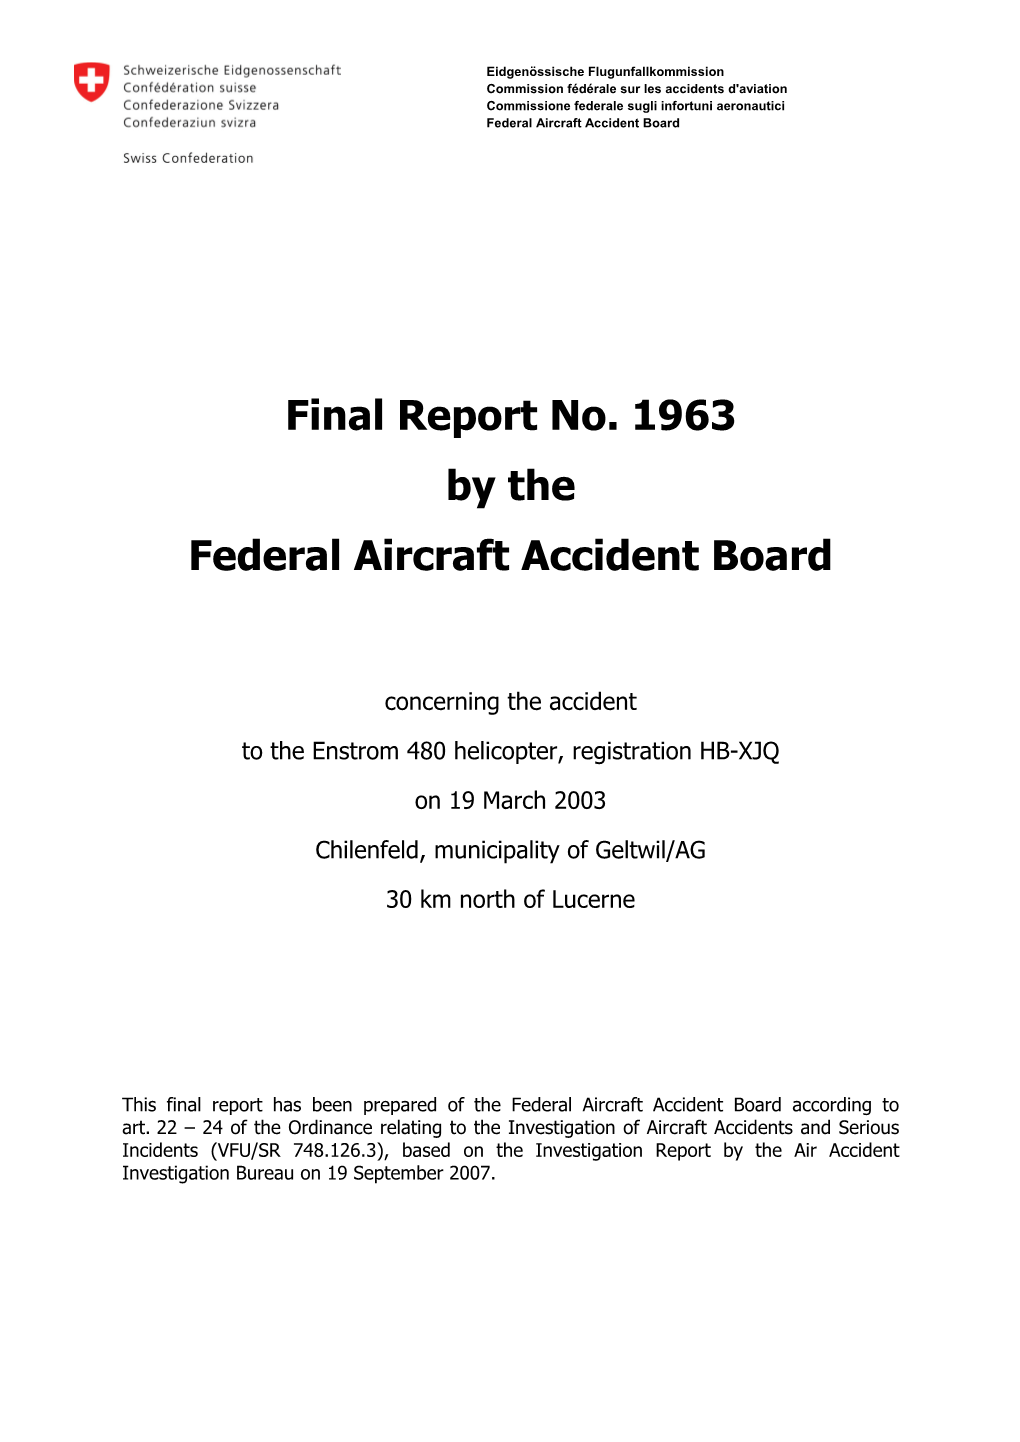 Final Report No. 1963 by the Federal Aircraft Accident Board